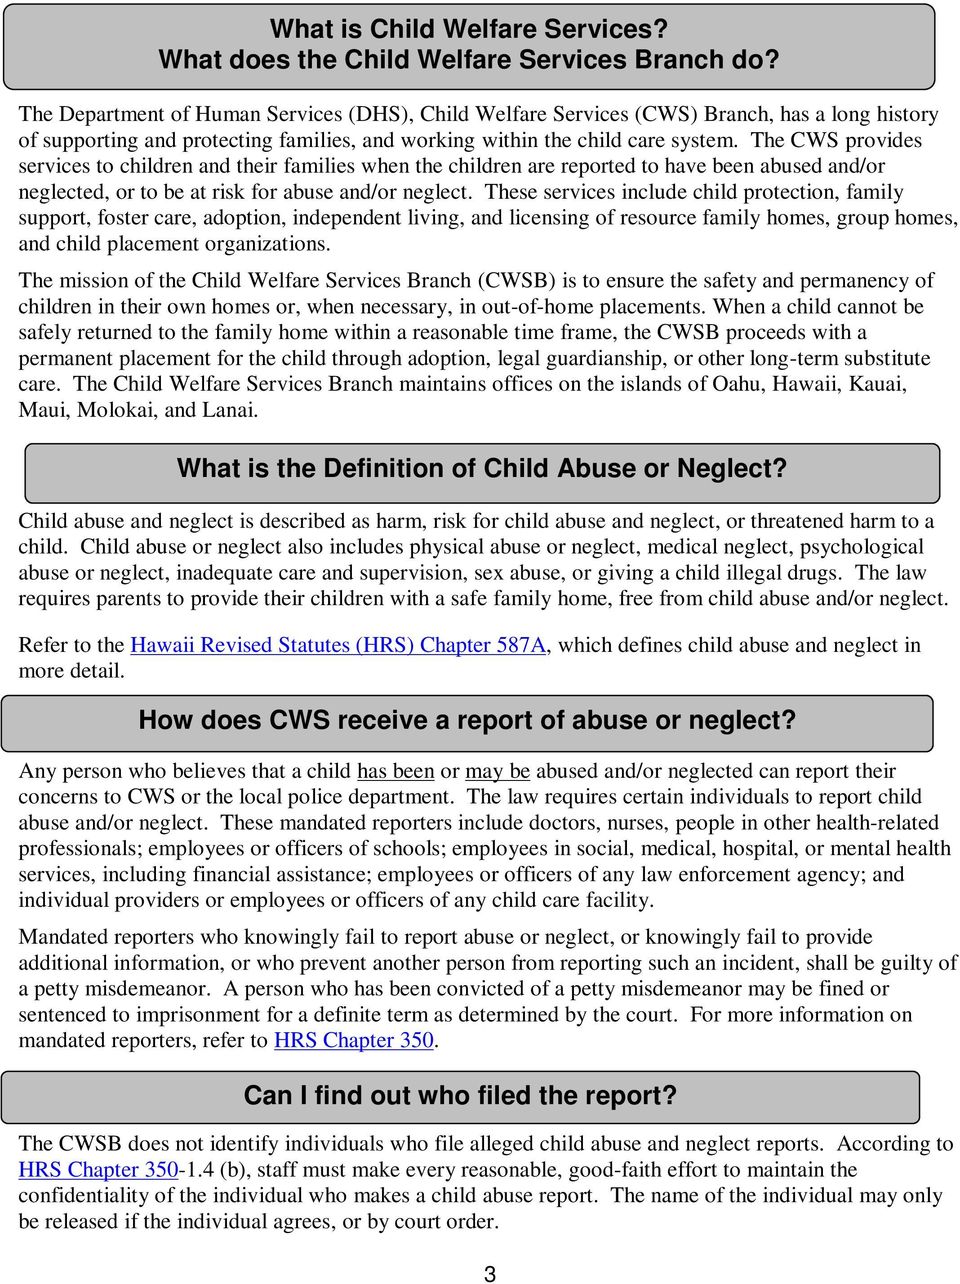 The CWS provides services to children and their families when the children are reported to have been abused and/or neglected, or to be at risk for abuse and/or neglect.